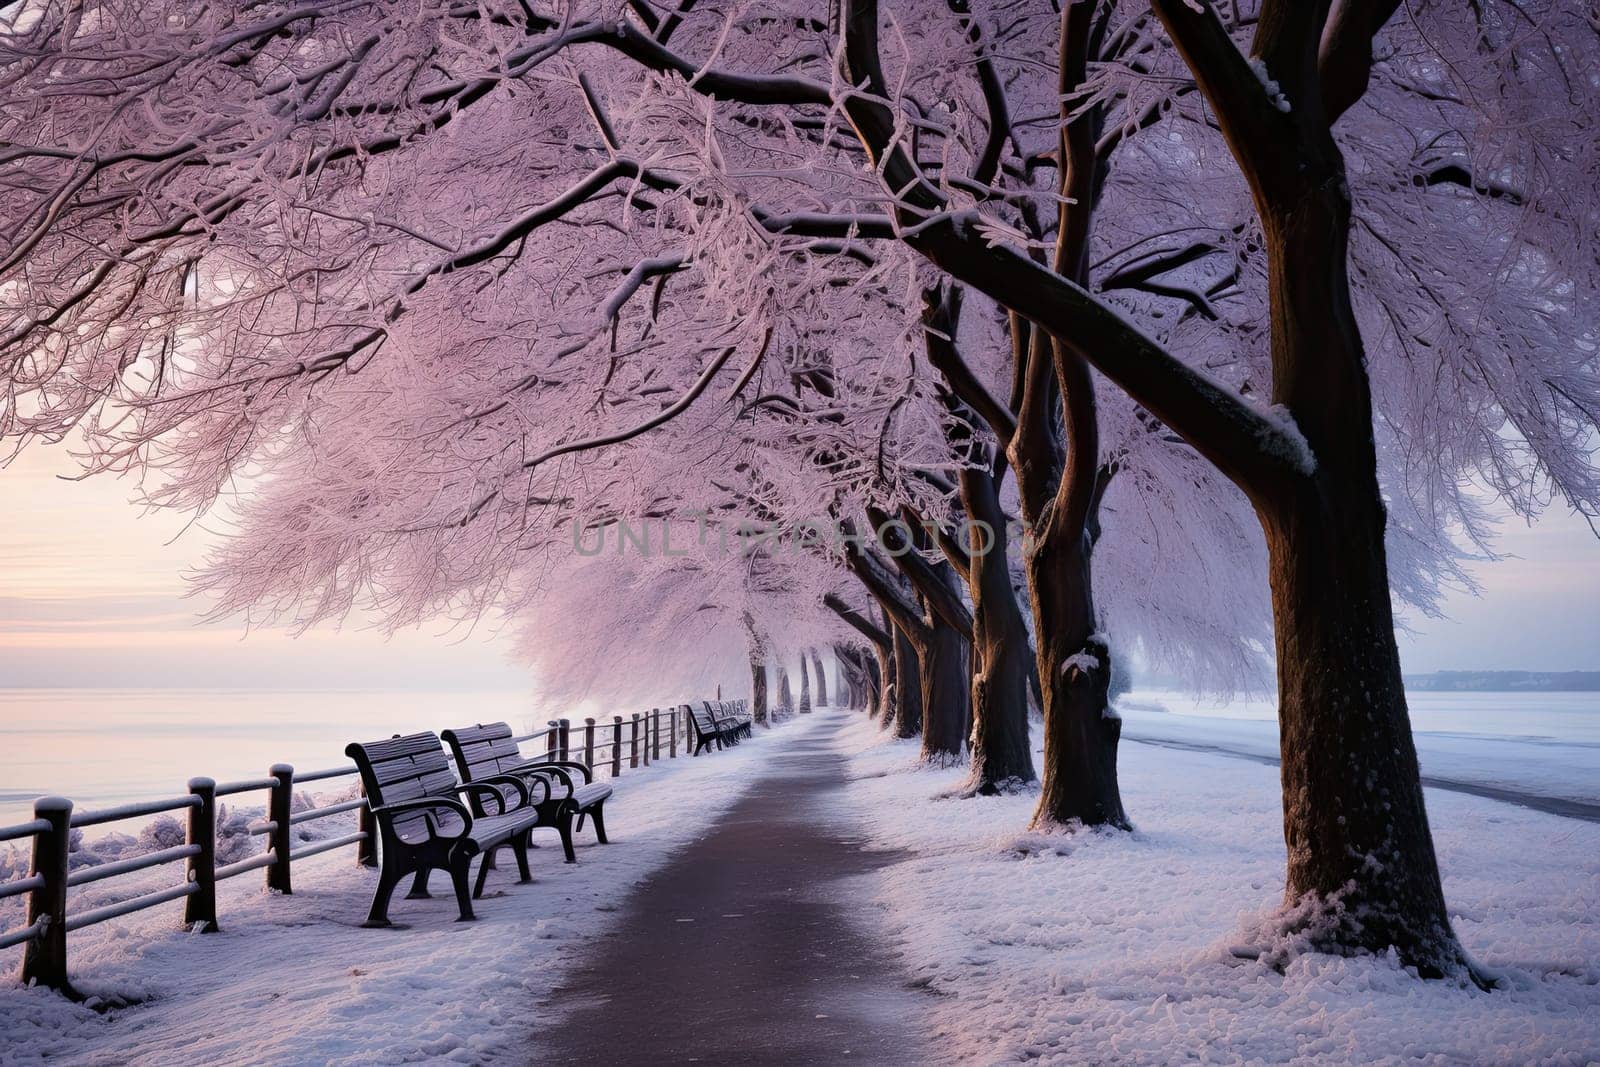 A Serene Winter Landscape: Benches Poised in a Snowy Meadow